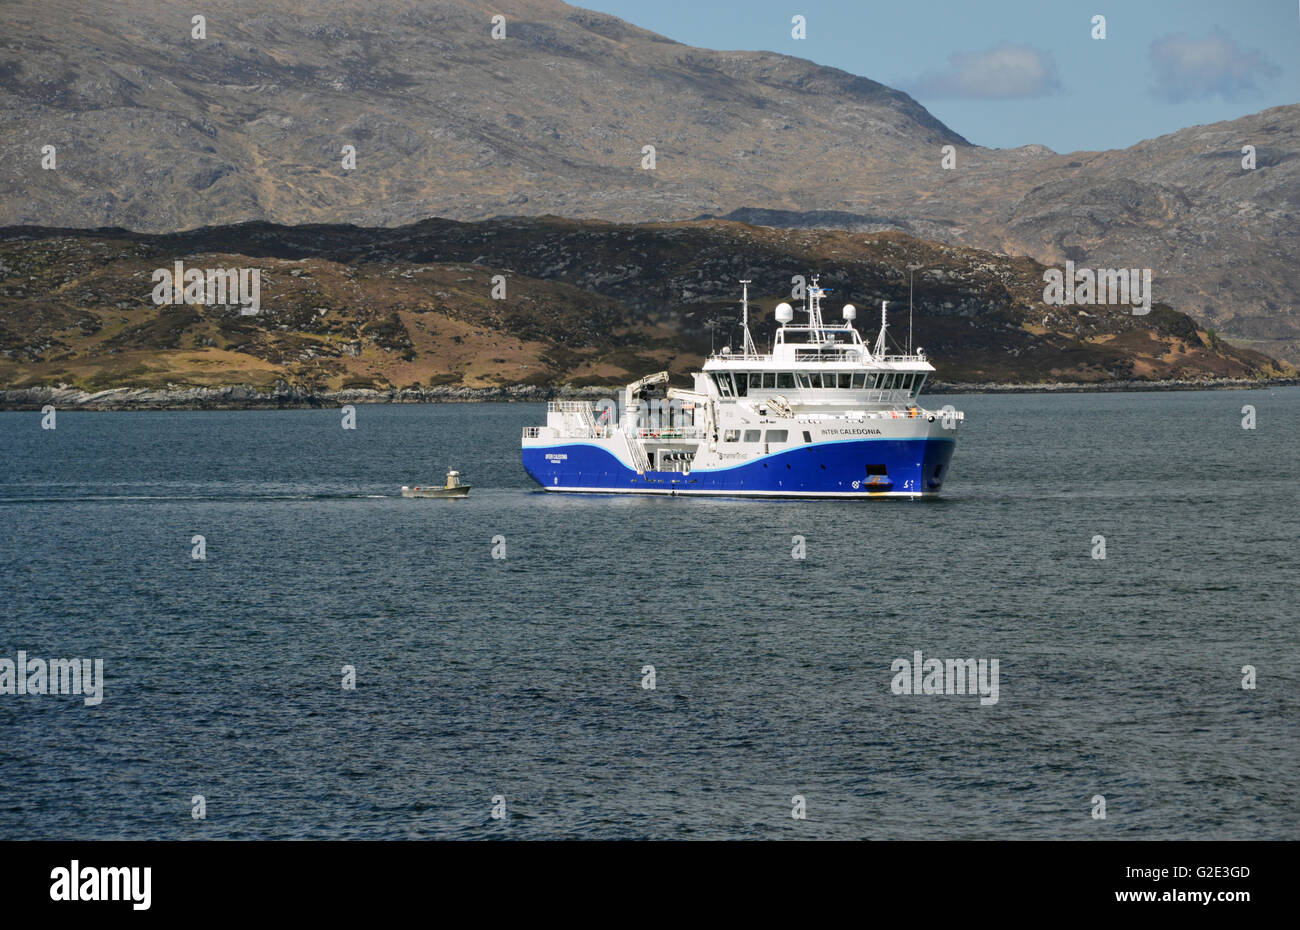 The Marine Harvest Inter Caledonia Live Fish Carrier Moored in Loch Ceann Dibig Outside the Port of Tarbert, Isle of Harris. Stock Photo